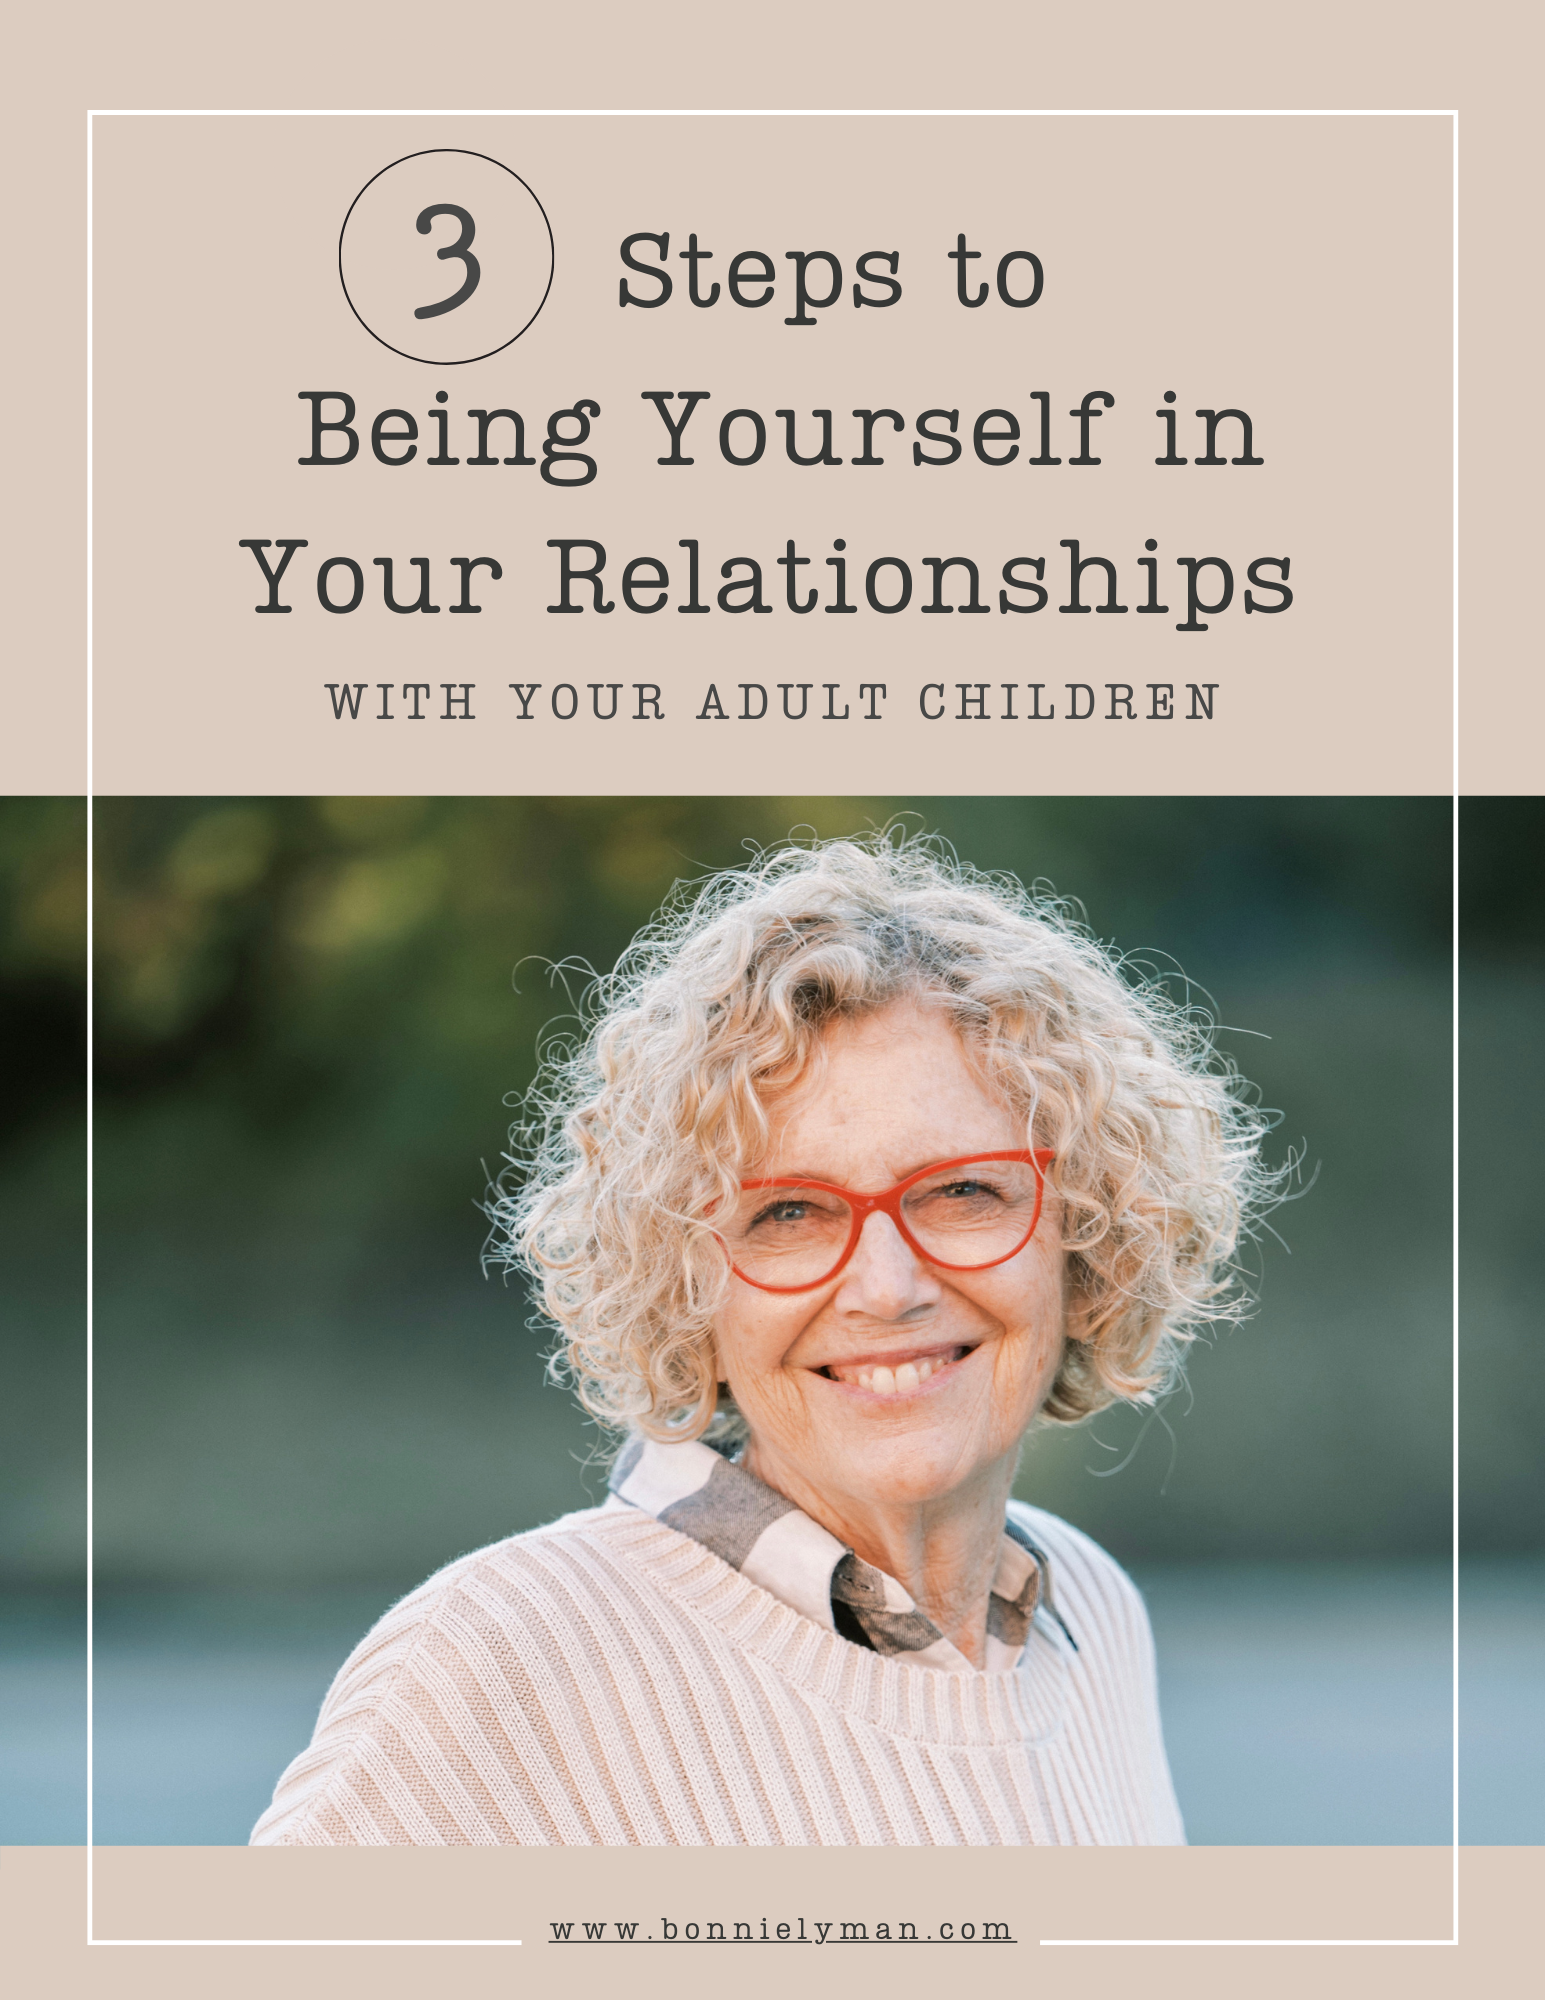 Being yourself in relationships with children